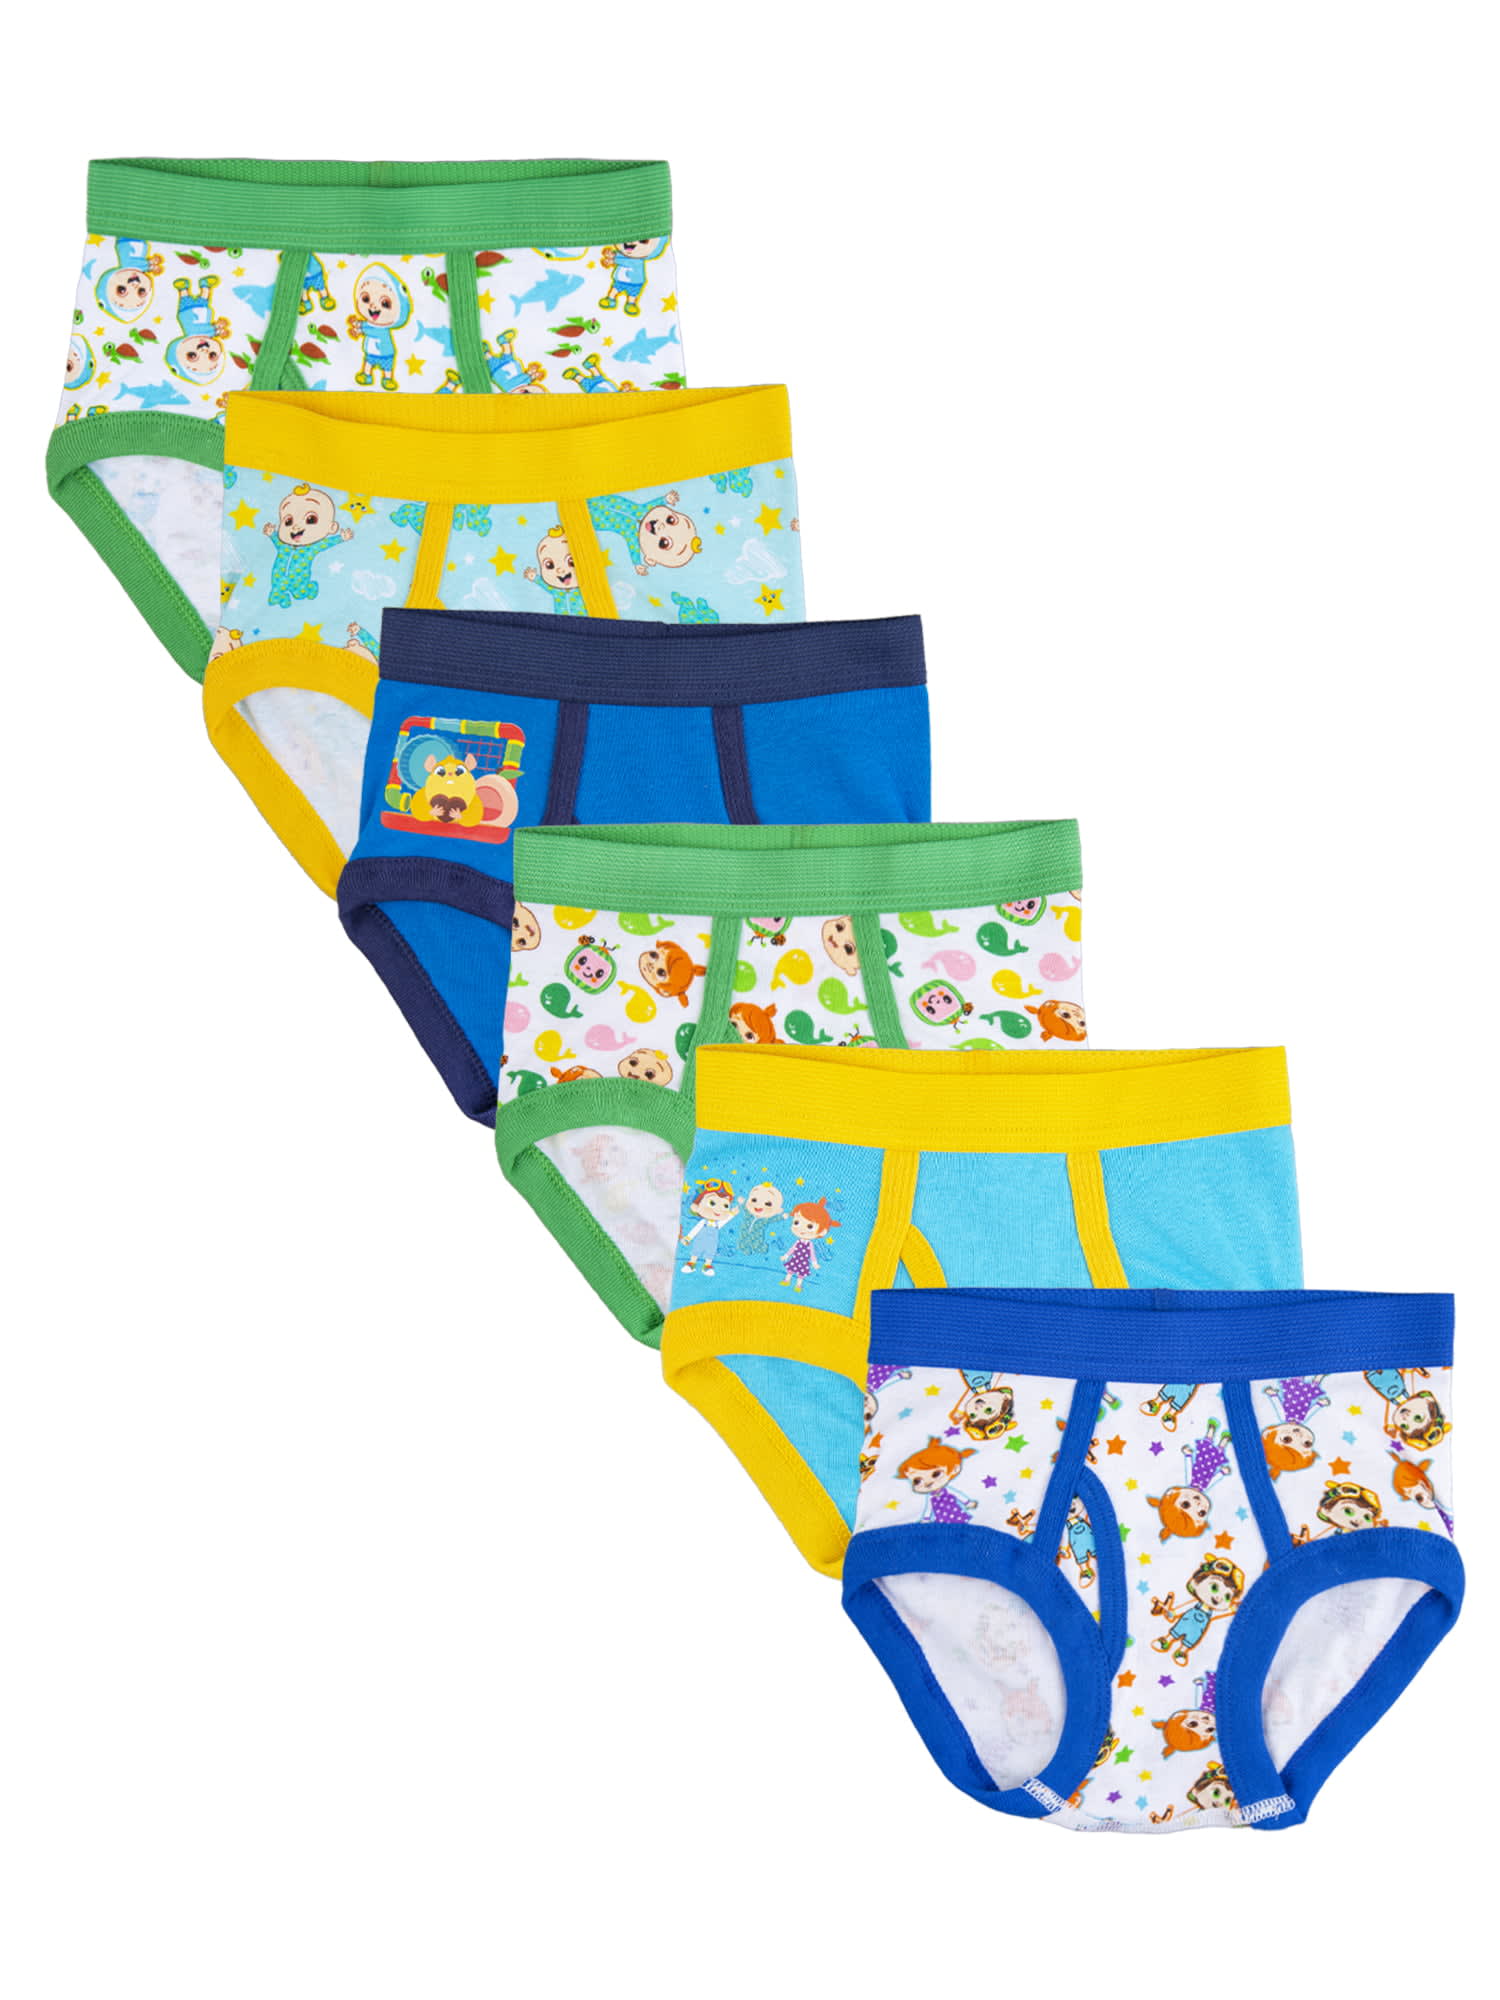 Cocomelon Toddler Girls' Training Pants, 6 - Pack, Sizes 4T